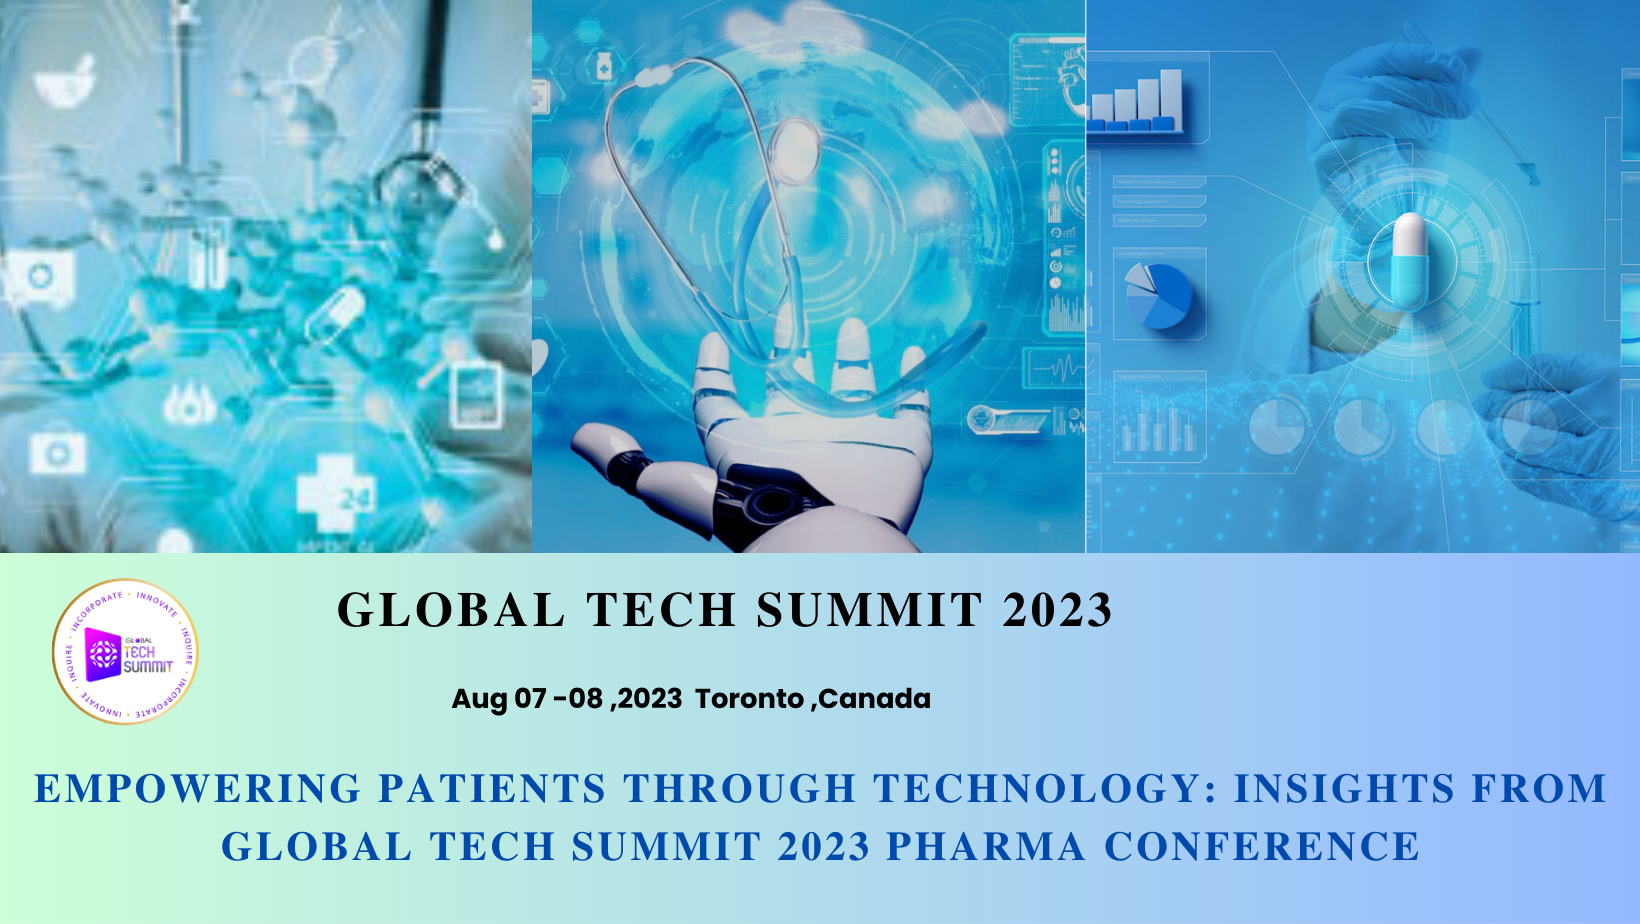 Empowering Patients through Technology: Insights from Global Tech Summit 2023 Pharma Conference